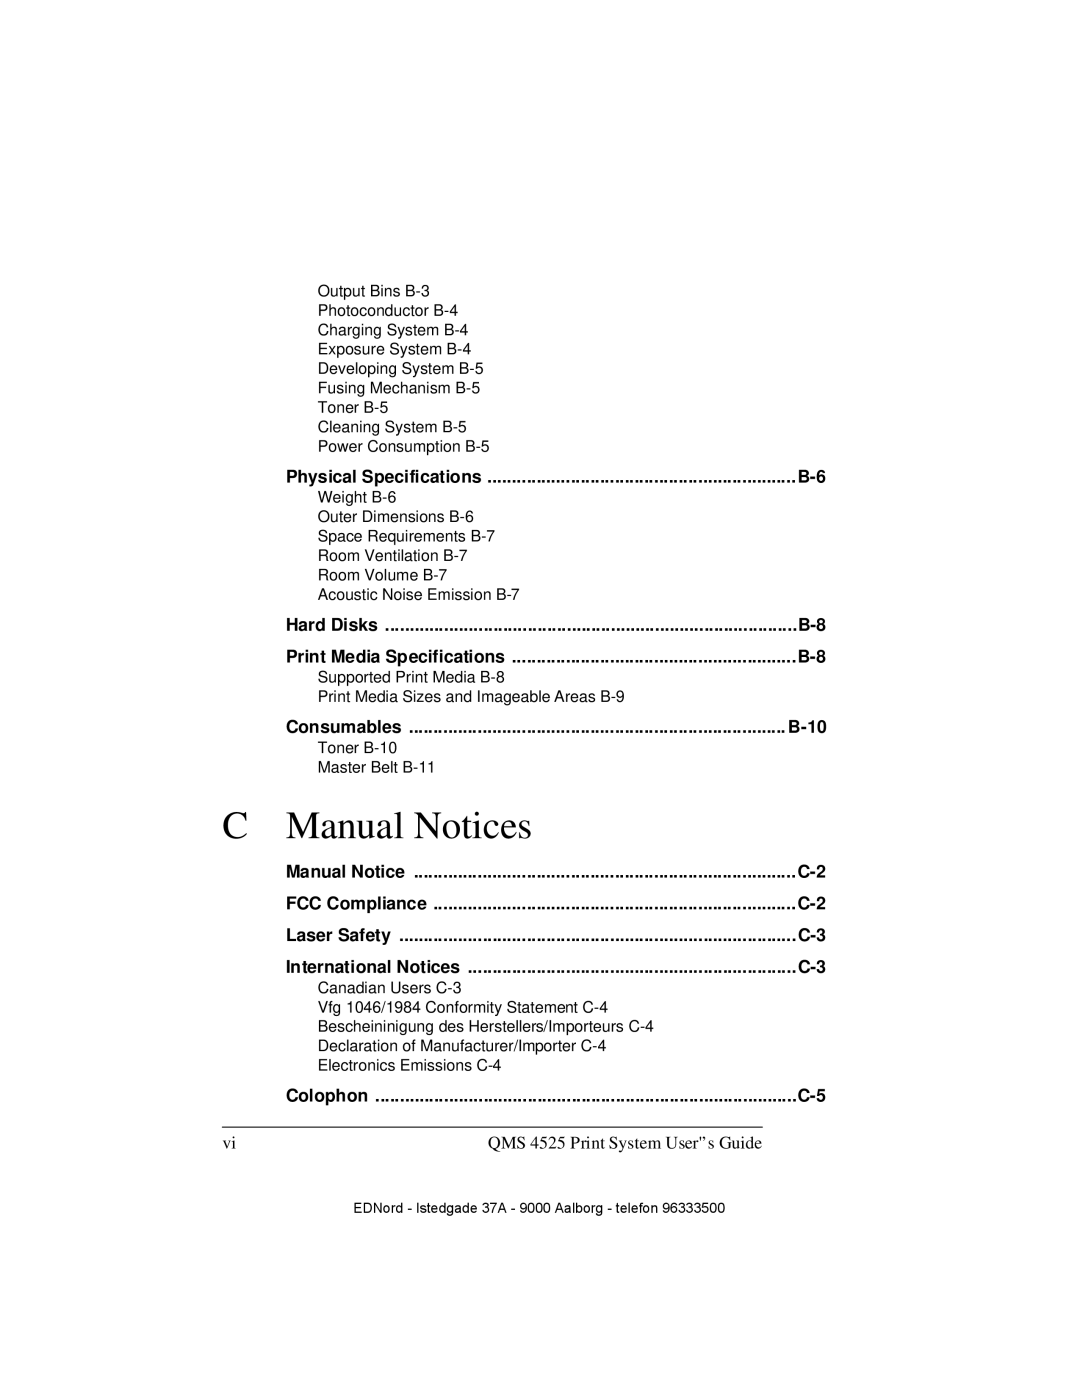 IBM Manual Notices, QMS 4525 Print System User’s Guide, Physical Specifications, Hard Disks, Print Media Specifications 